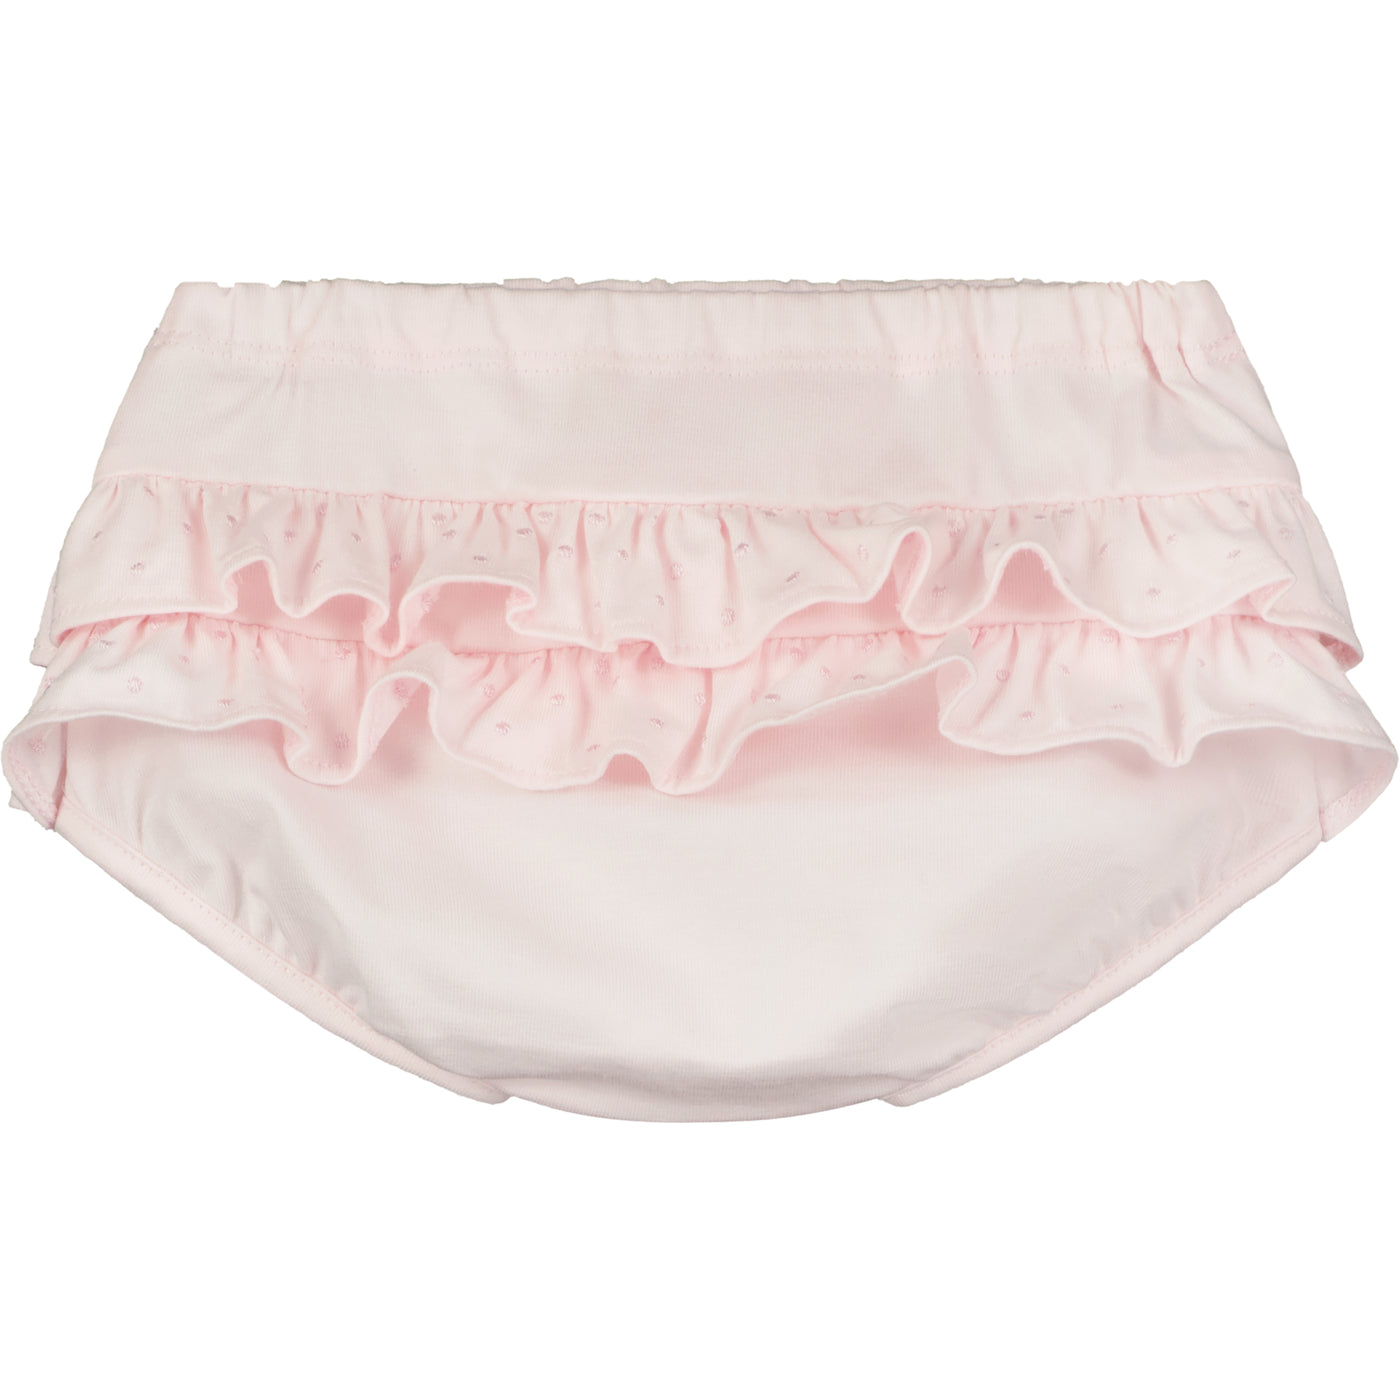 Flossie Pink Frilly Baby Girls Pants